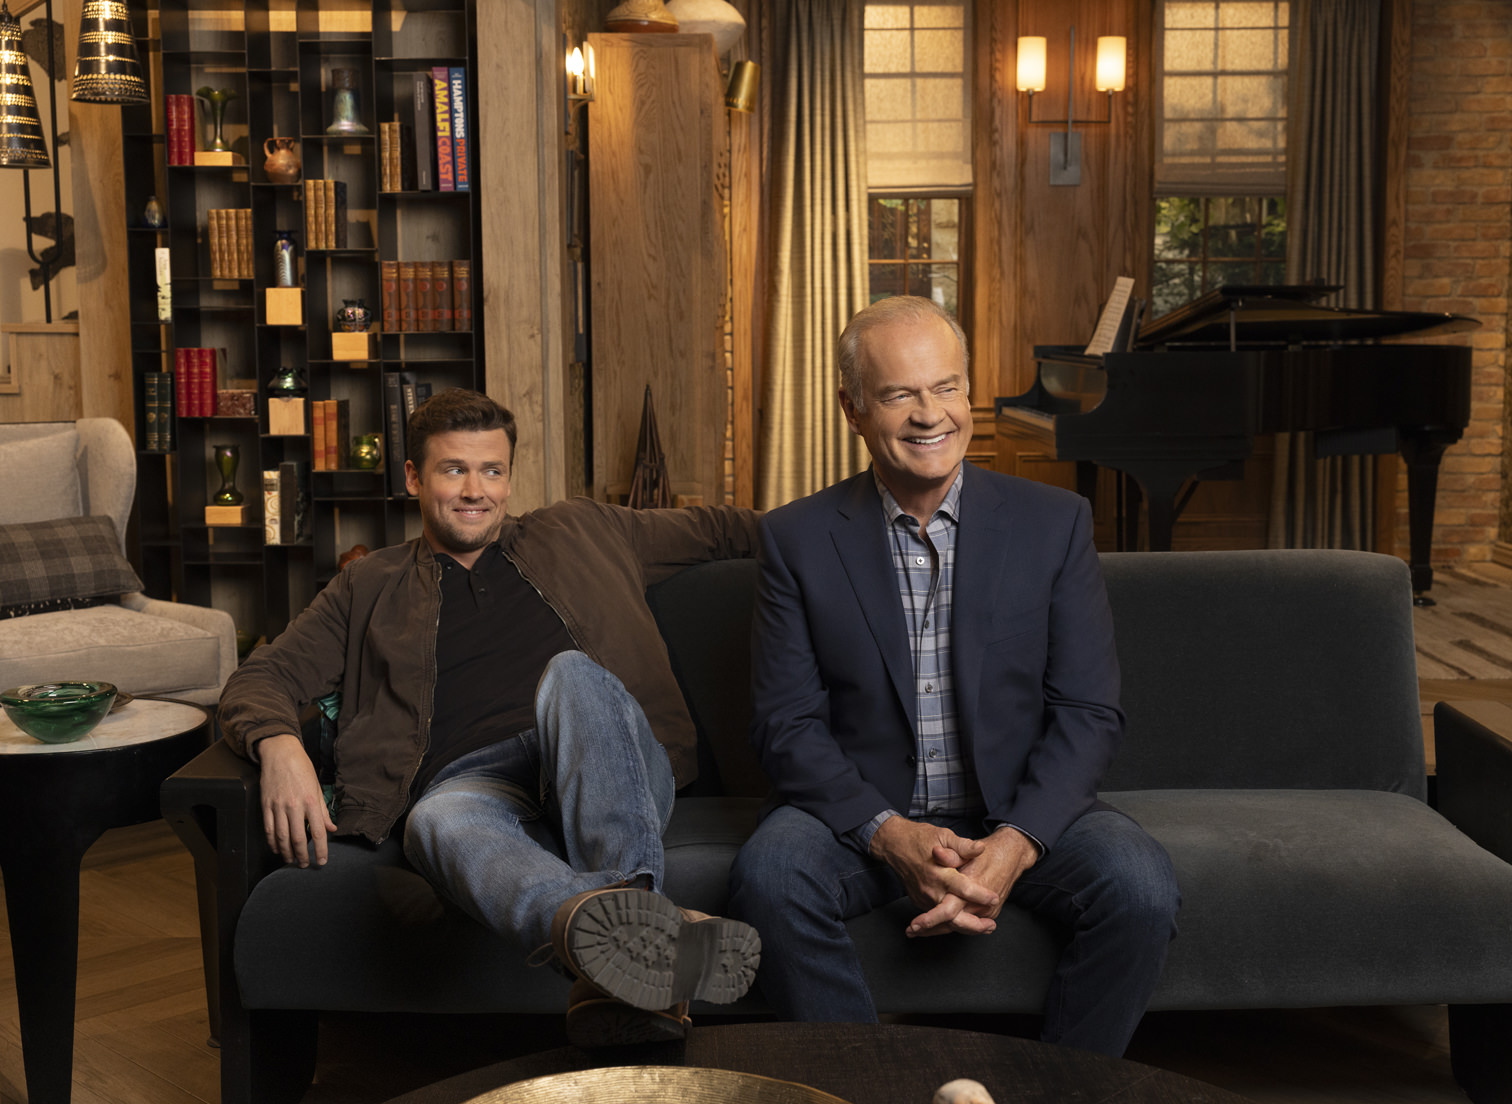 L-R: Jack Cutmore-Scott as Freddy Crane and Kelsey Grammer as Frasier Crane in Frasier, streaming on Paramount+, 2023. Photo credit: Pamela Littky/Paramount+    TM & © 2023 CBS Studios Inc. Frasier and related marks and logos are trademarks of CBS Studios Inc. All Rights Reserved.